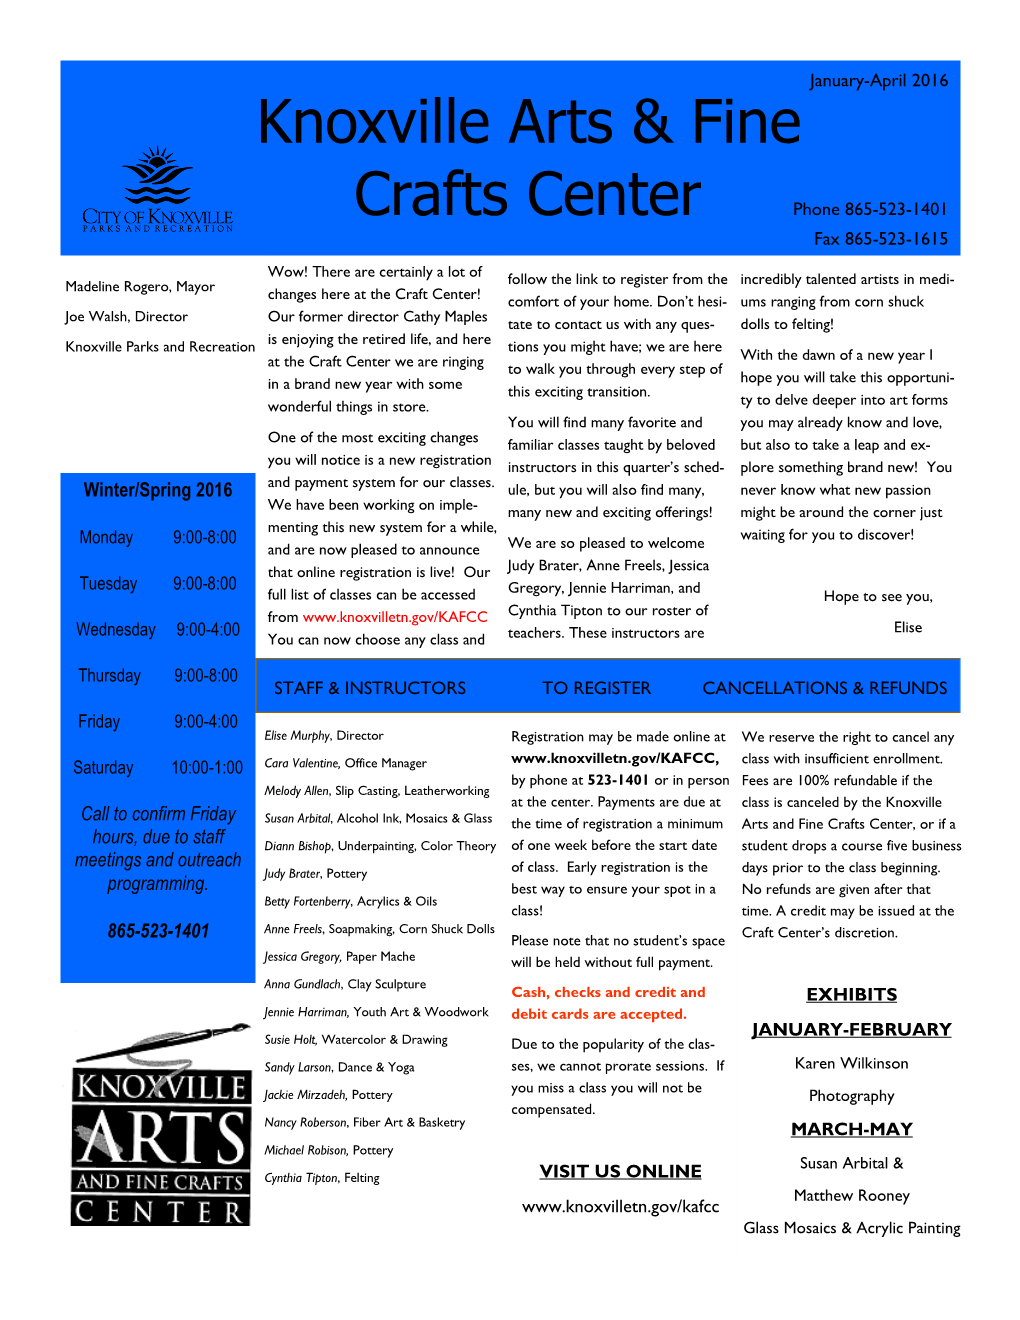 Knoxville Arts & Fine Crafts Center